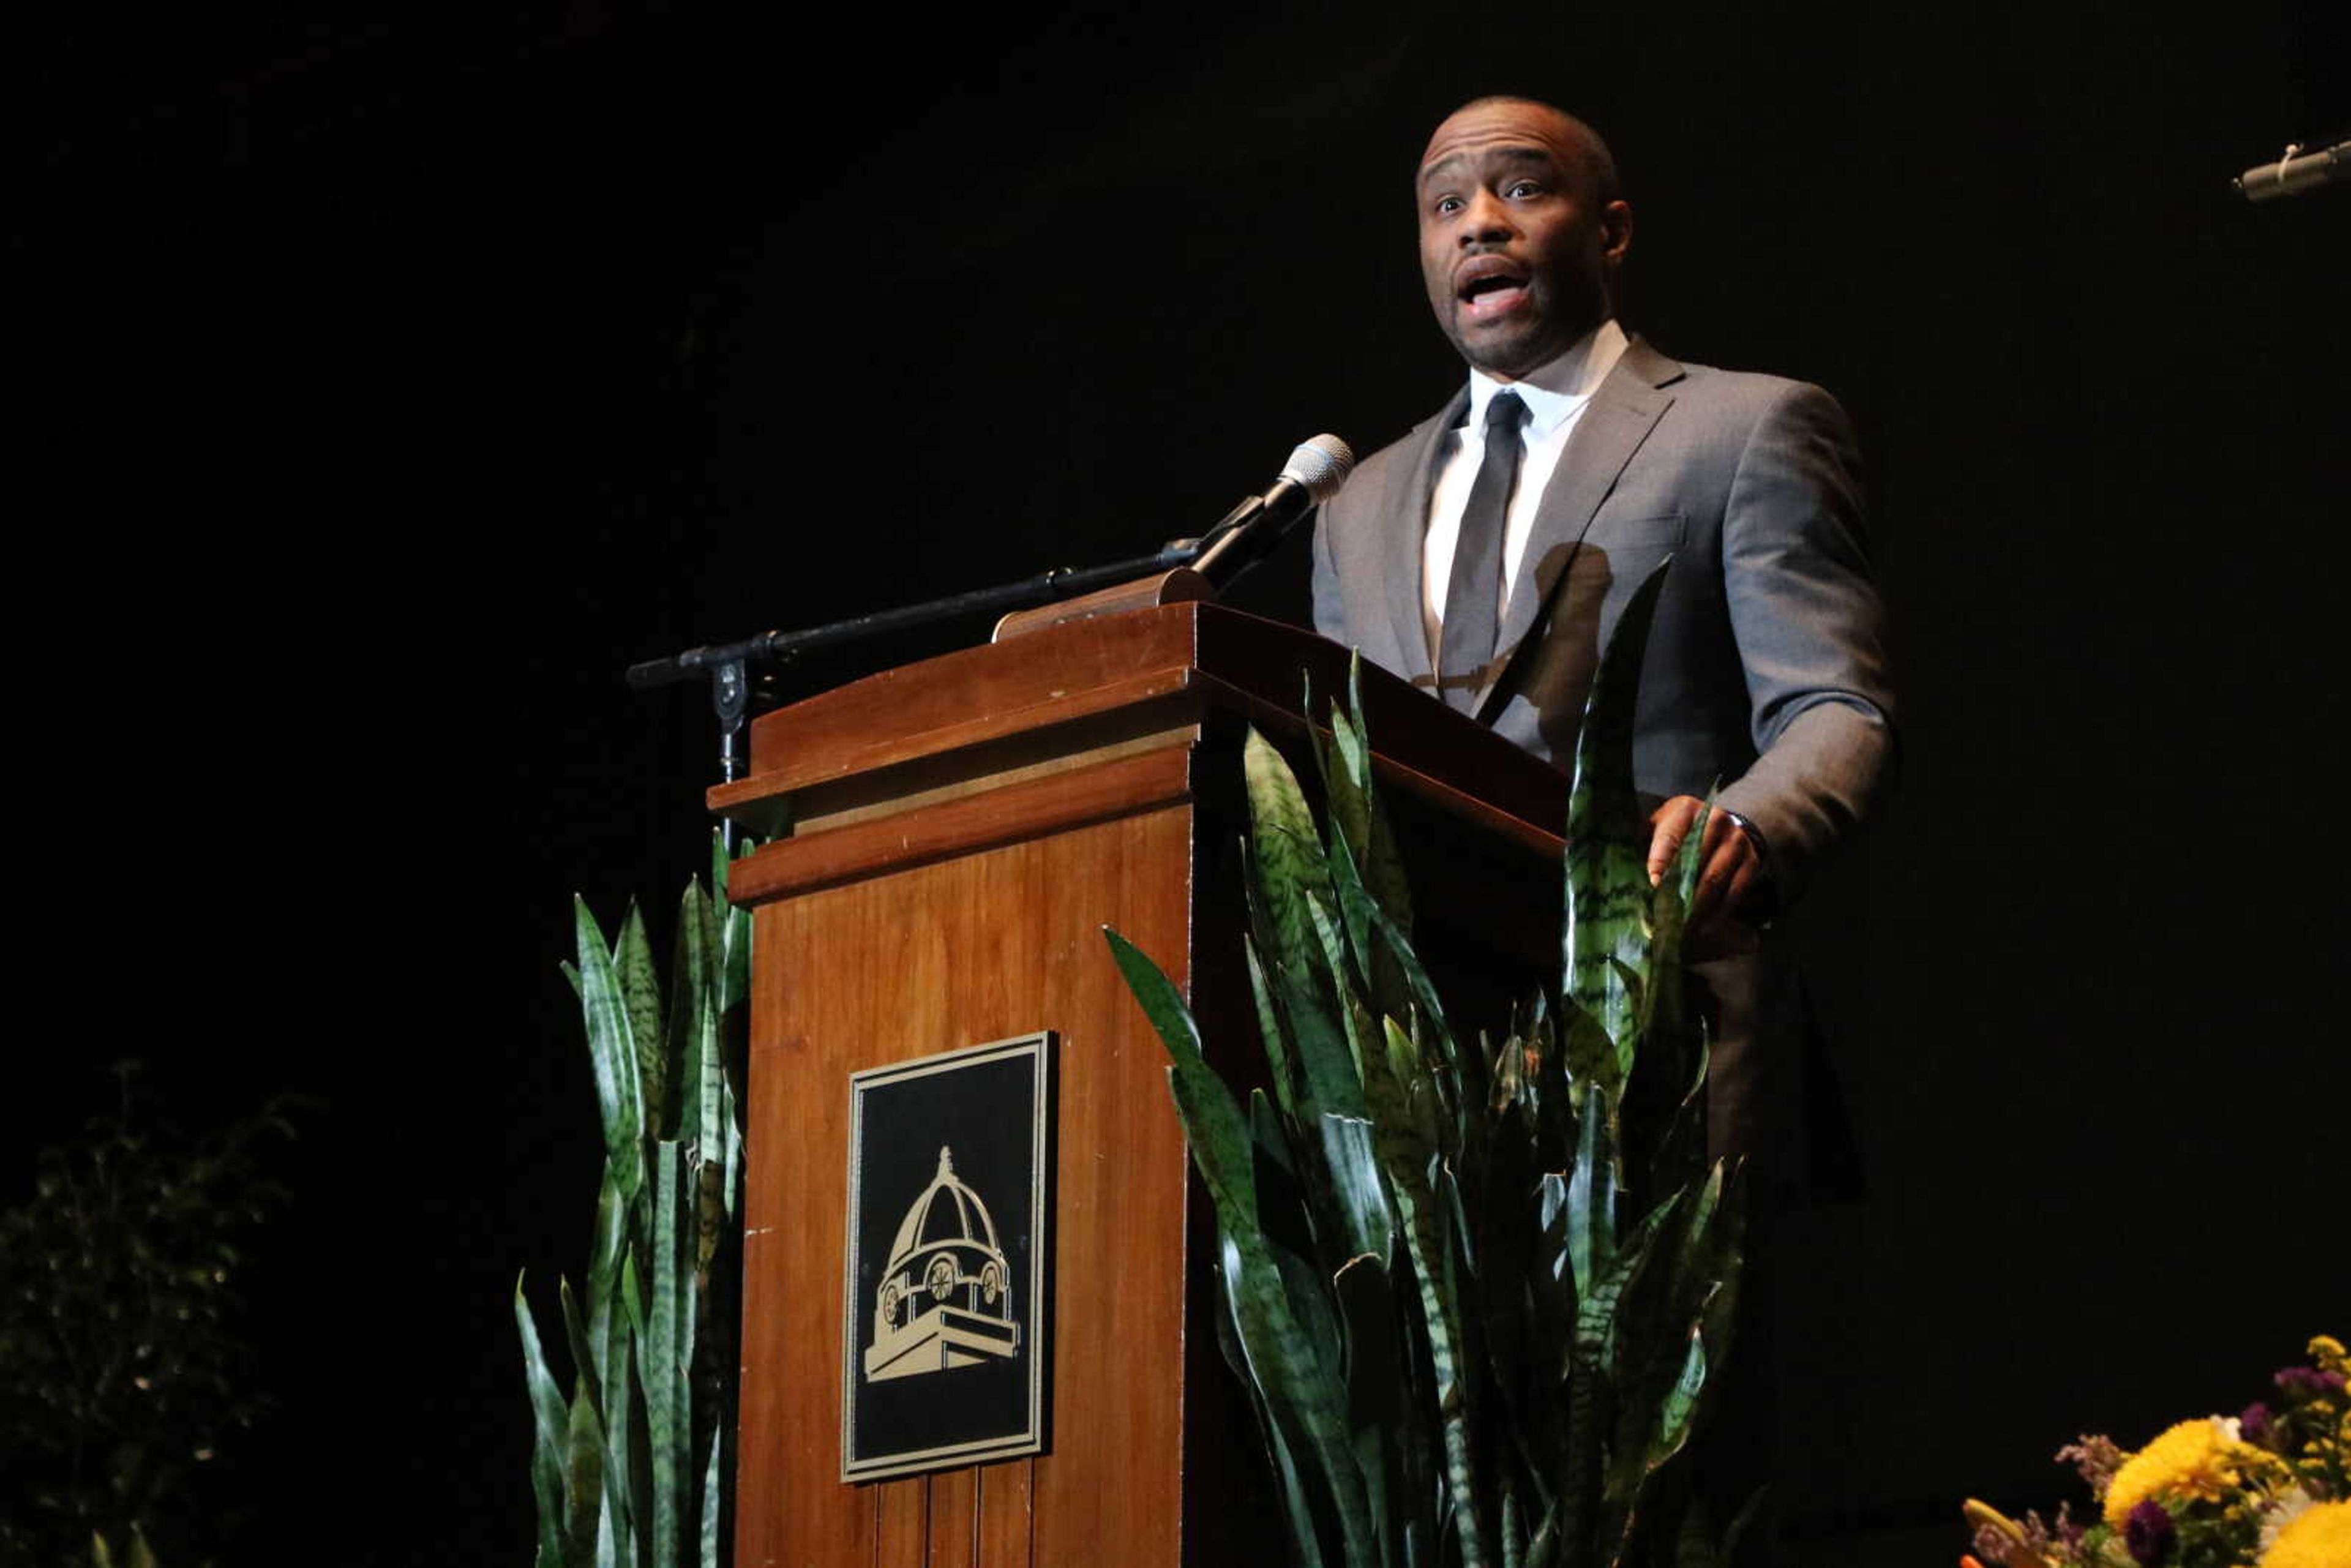 Marc Lamont Hill keynotes the annual Martin Luther King Jr. Celebration Dinner at the Show Me Center Jan. 23.